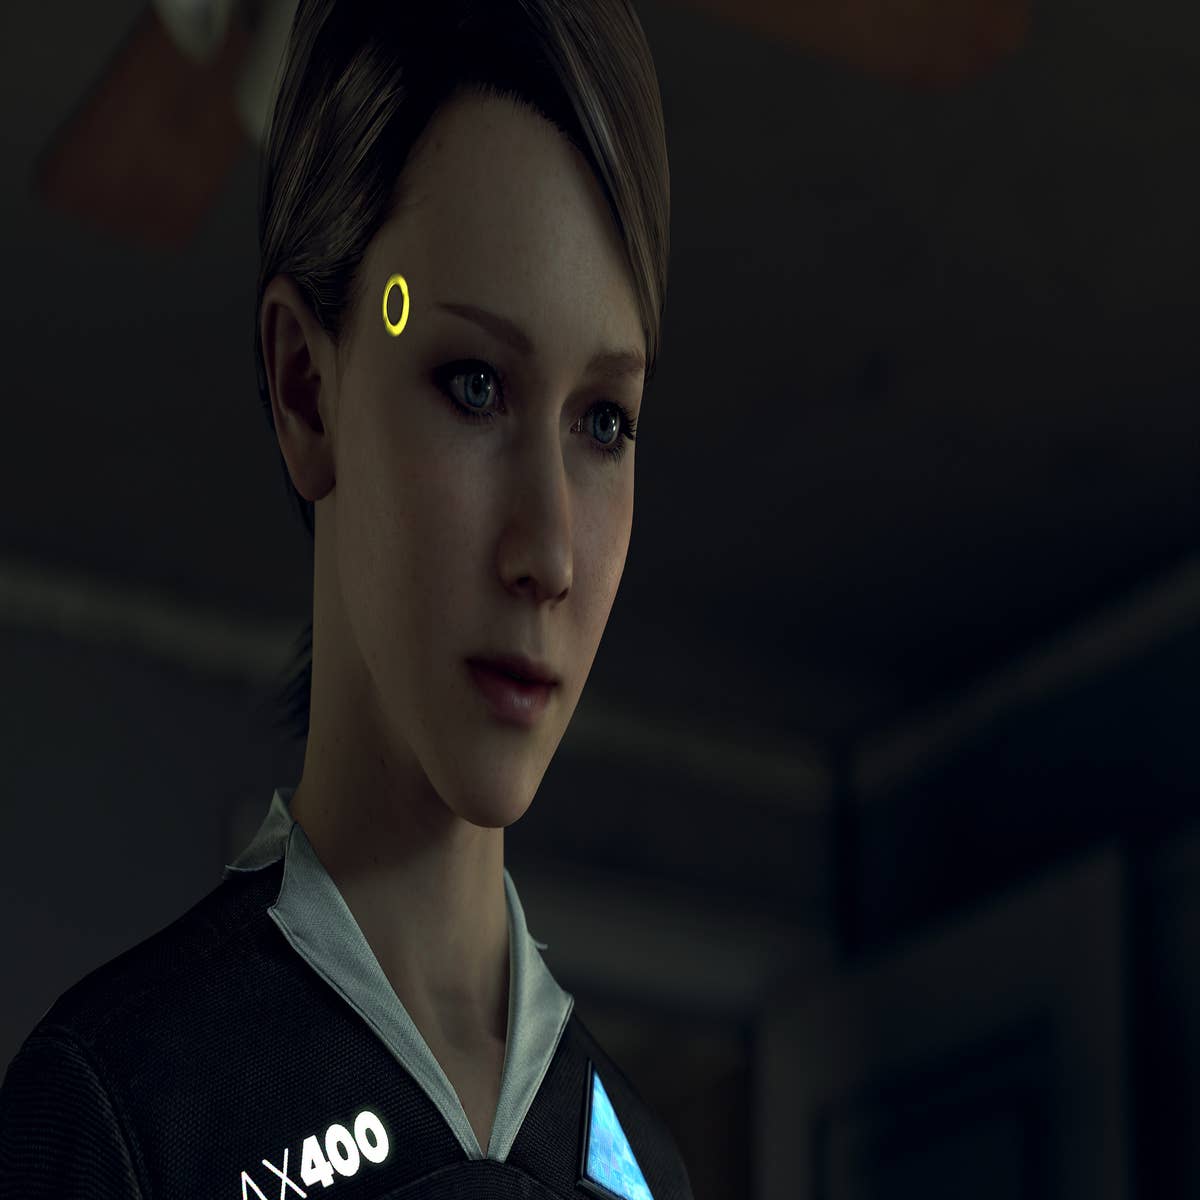 DETROIT BECOME HUMAN Gameplay Walkthrough Part 1 FULL GAME [1080p HD PS4  PRO] - No Commentary 